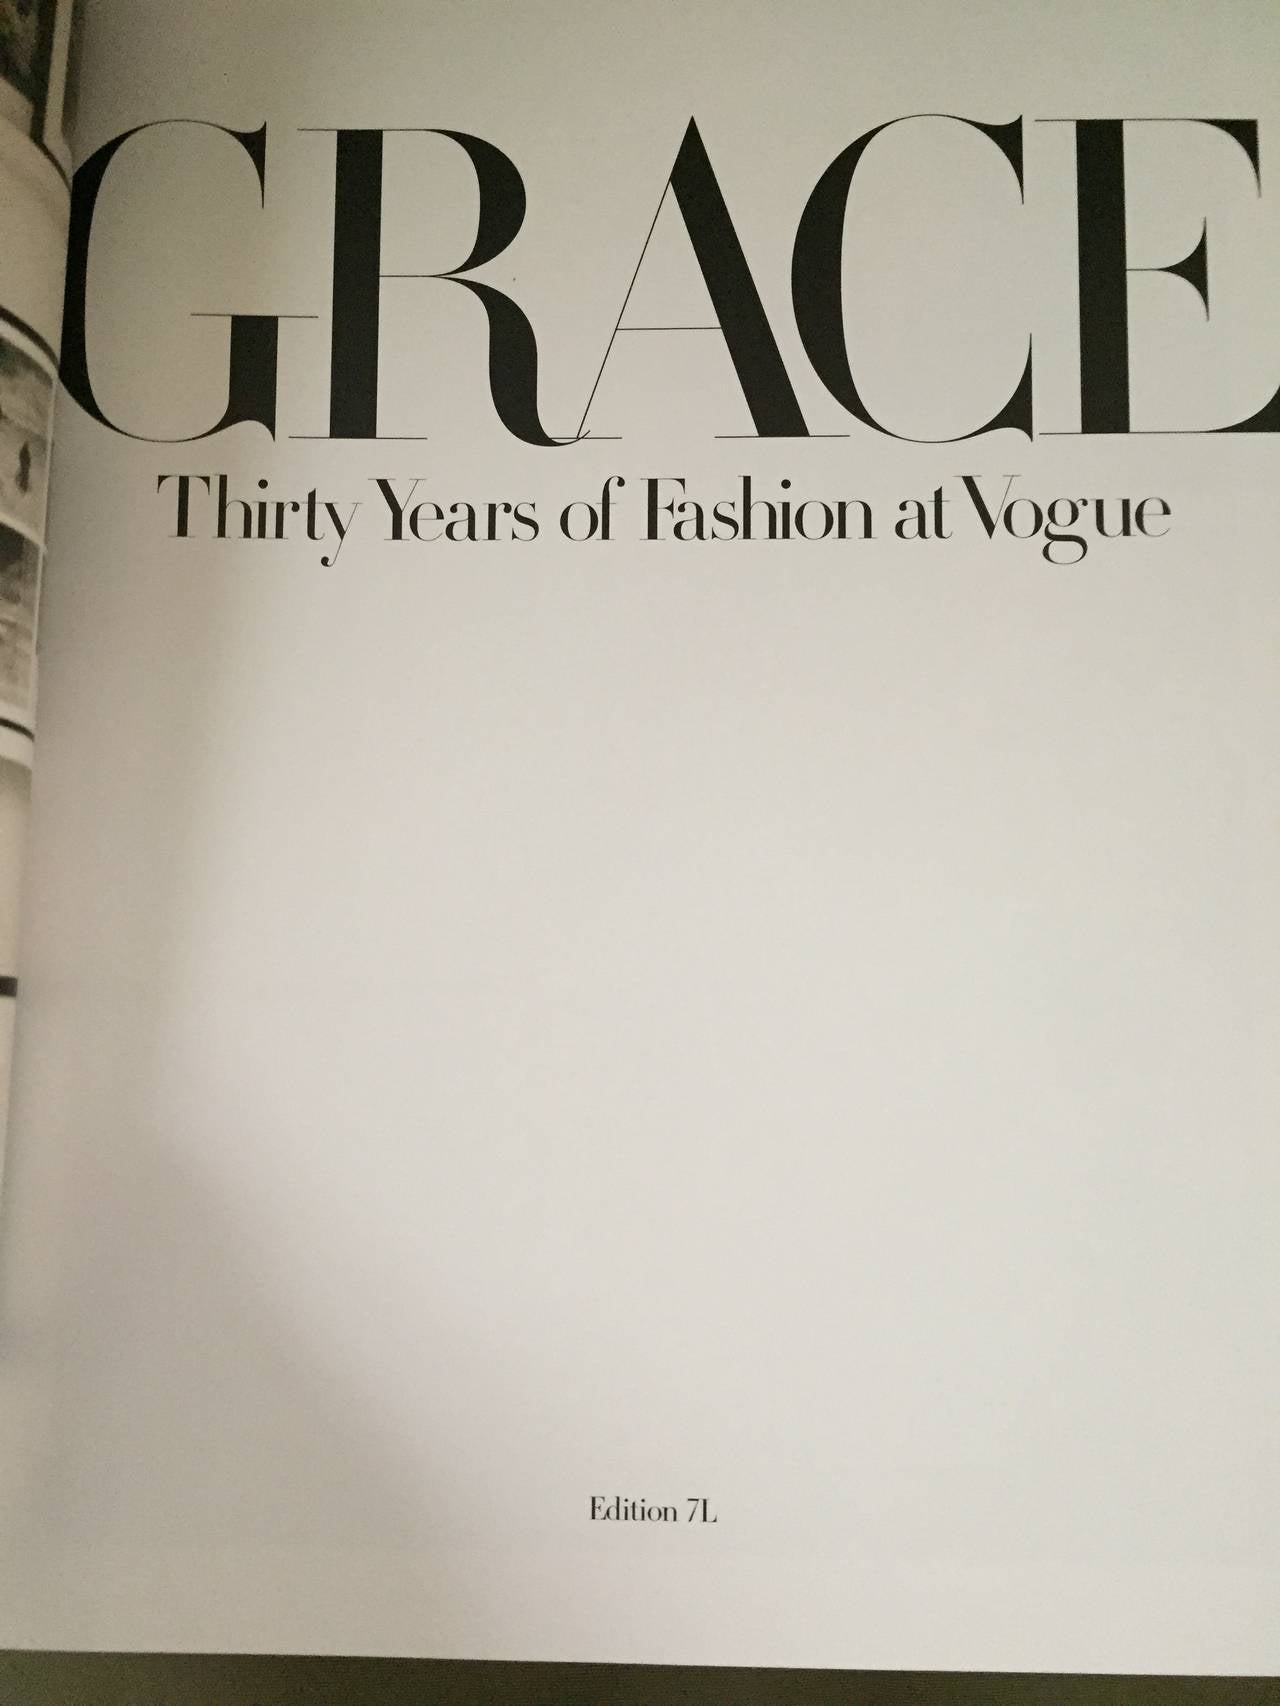 Black Grace Thirty Years of Fashion at Vogue First Edition For Sale